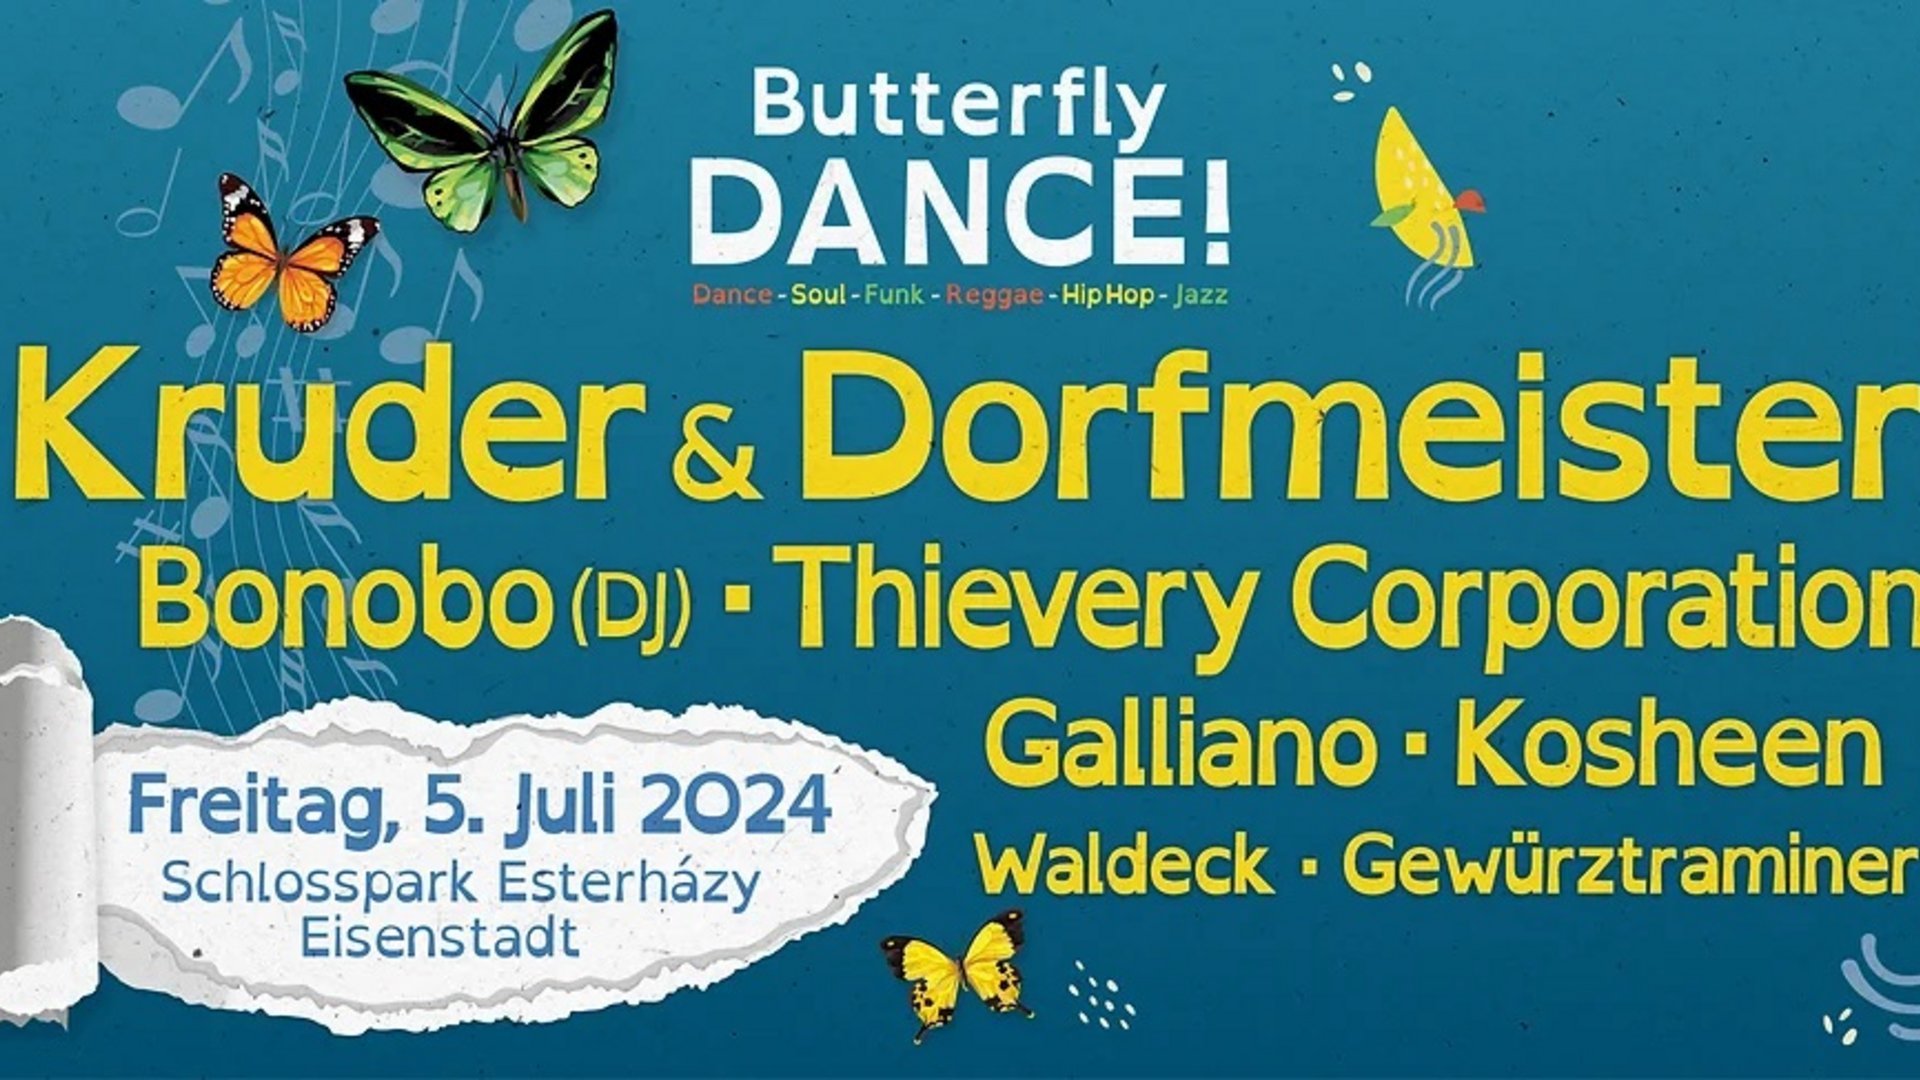 Butterfly Dance!-Shuttle 2024 - sponsored by Tourismusverband Nordburgenland